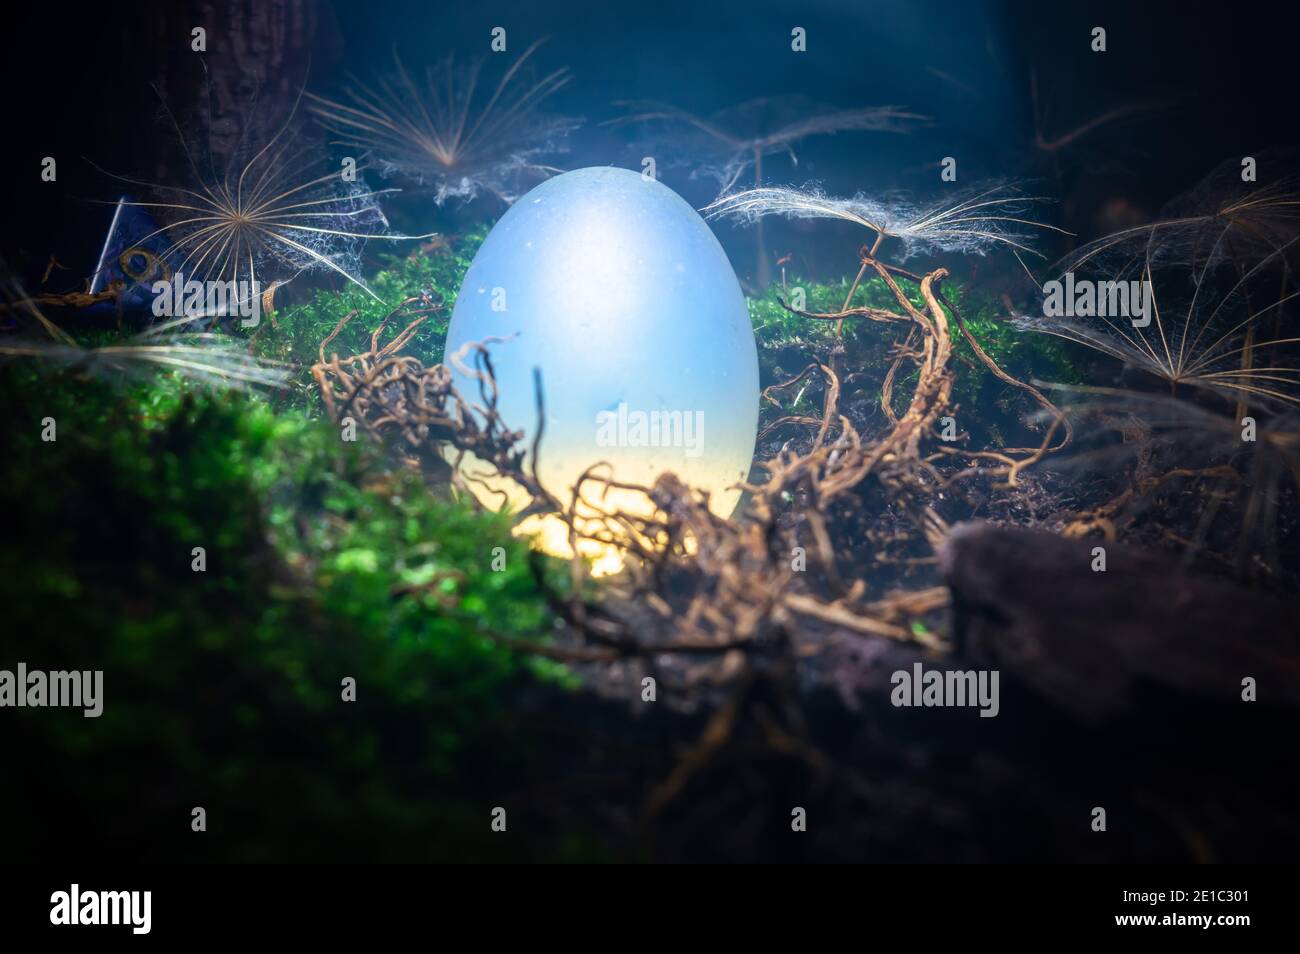 Close-up fantasy scene of a white opaque egg in a beam of light. It's surrounded by dandelion seeds and rests on a bed of moss, dirt and roots. Stock Photo